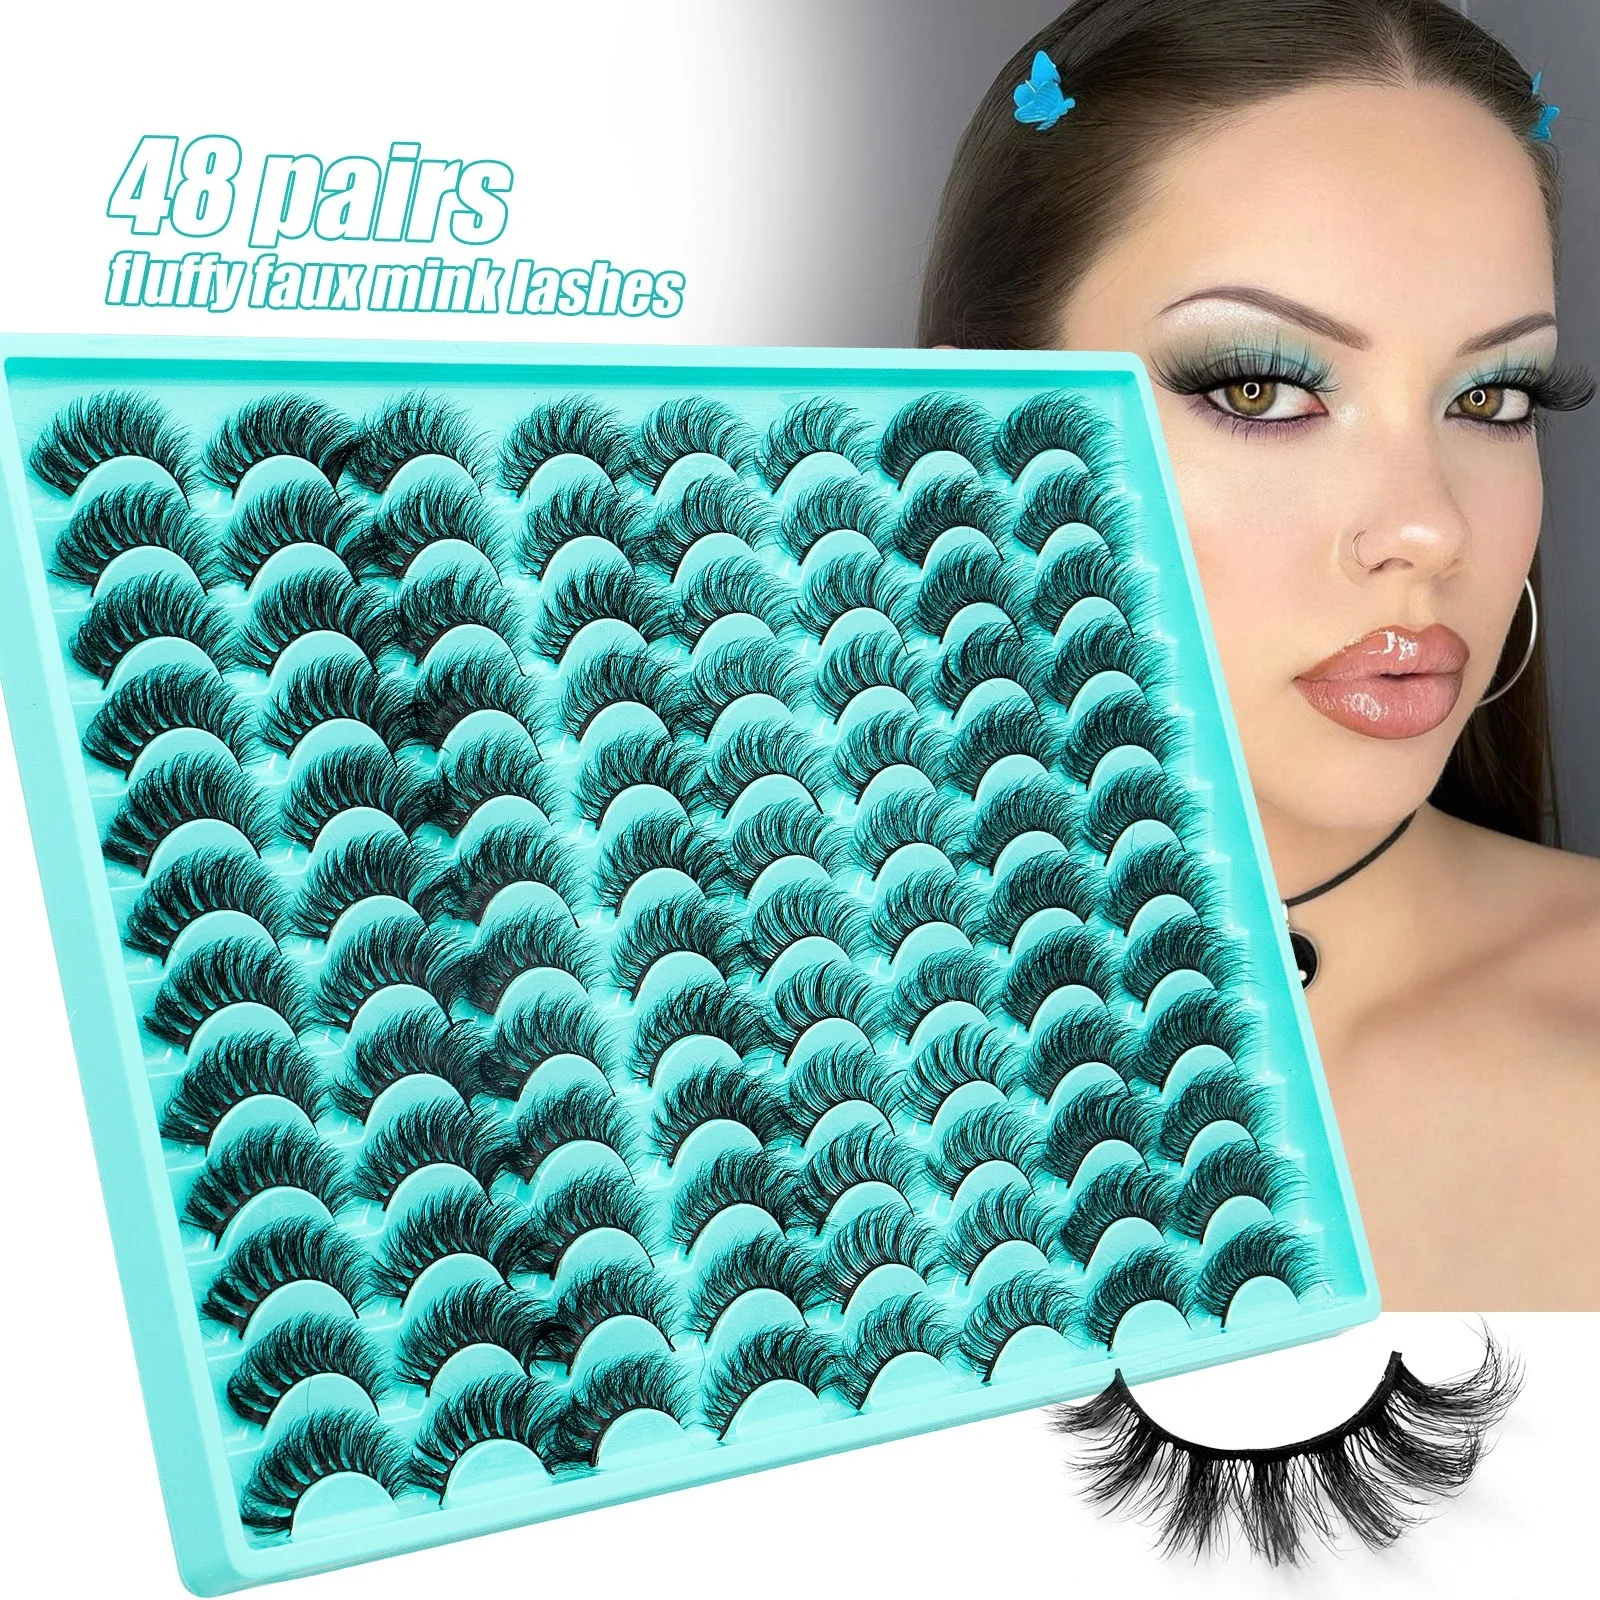 

Multilayer Thick Fluffy Faux Mink Eyelashes Curly Crisscross Hand Made Reusable 48 Pairs Fake Lashes Mink Full Strip Eyelash